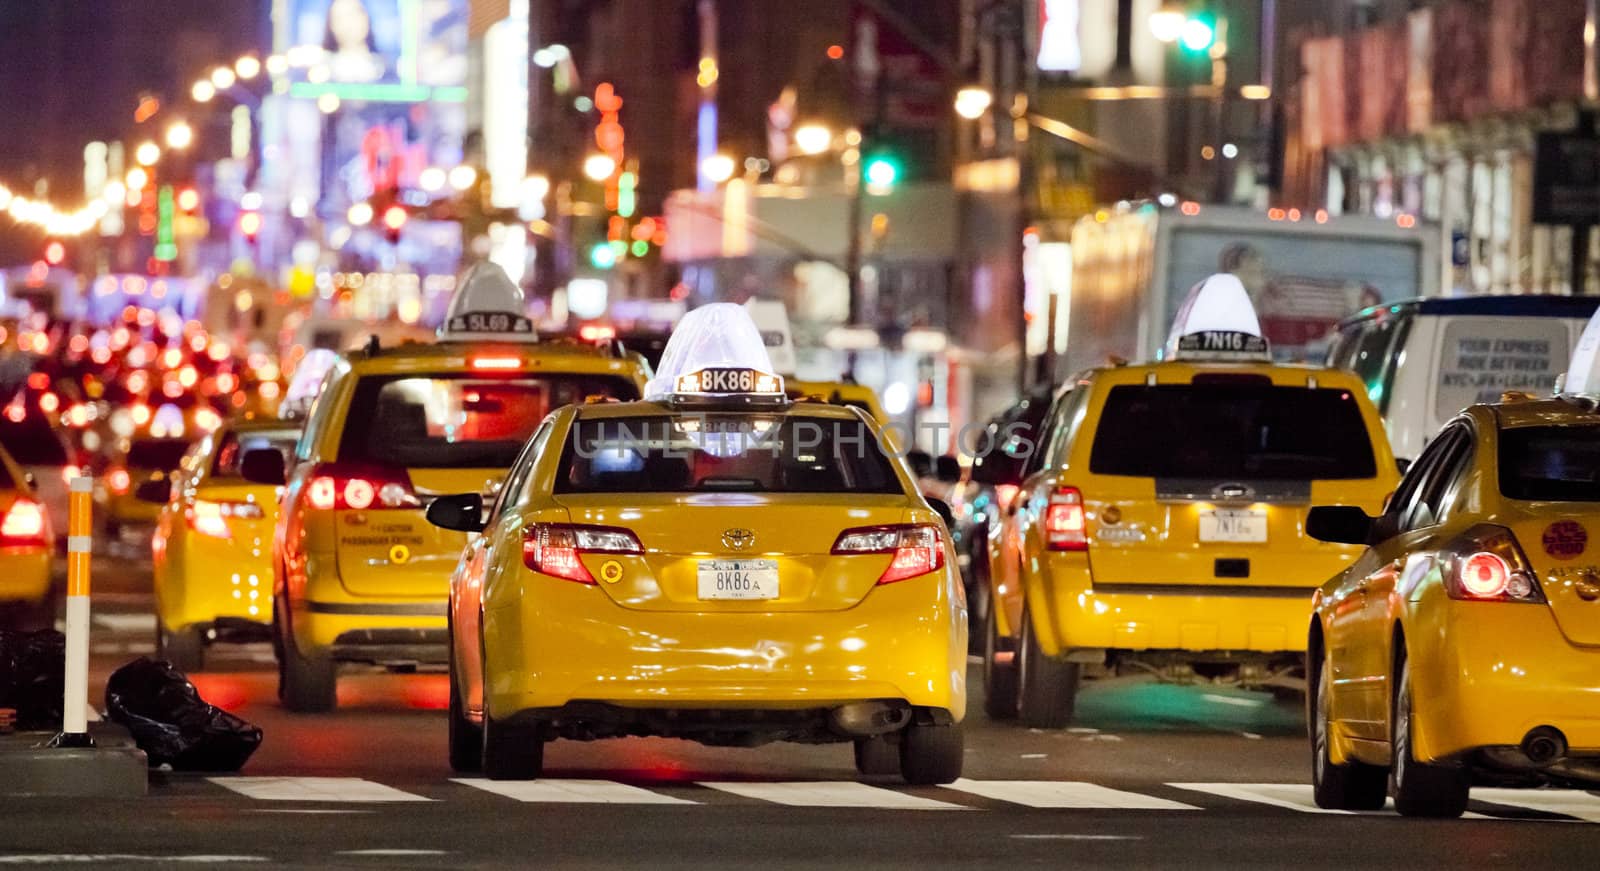 NEW YORK CITY - SEPT 22: Eight Avenue, featured with Taxi Cabs by hanusst